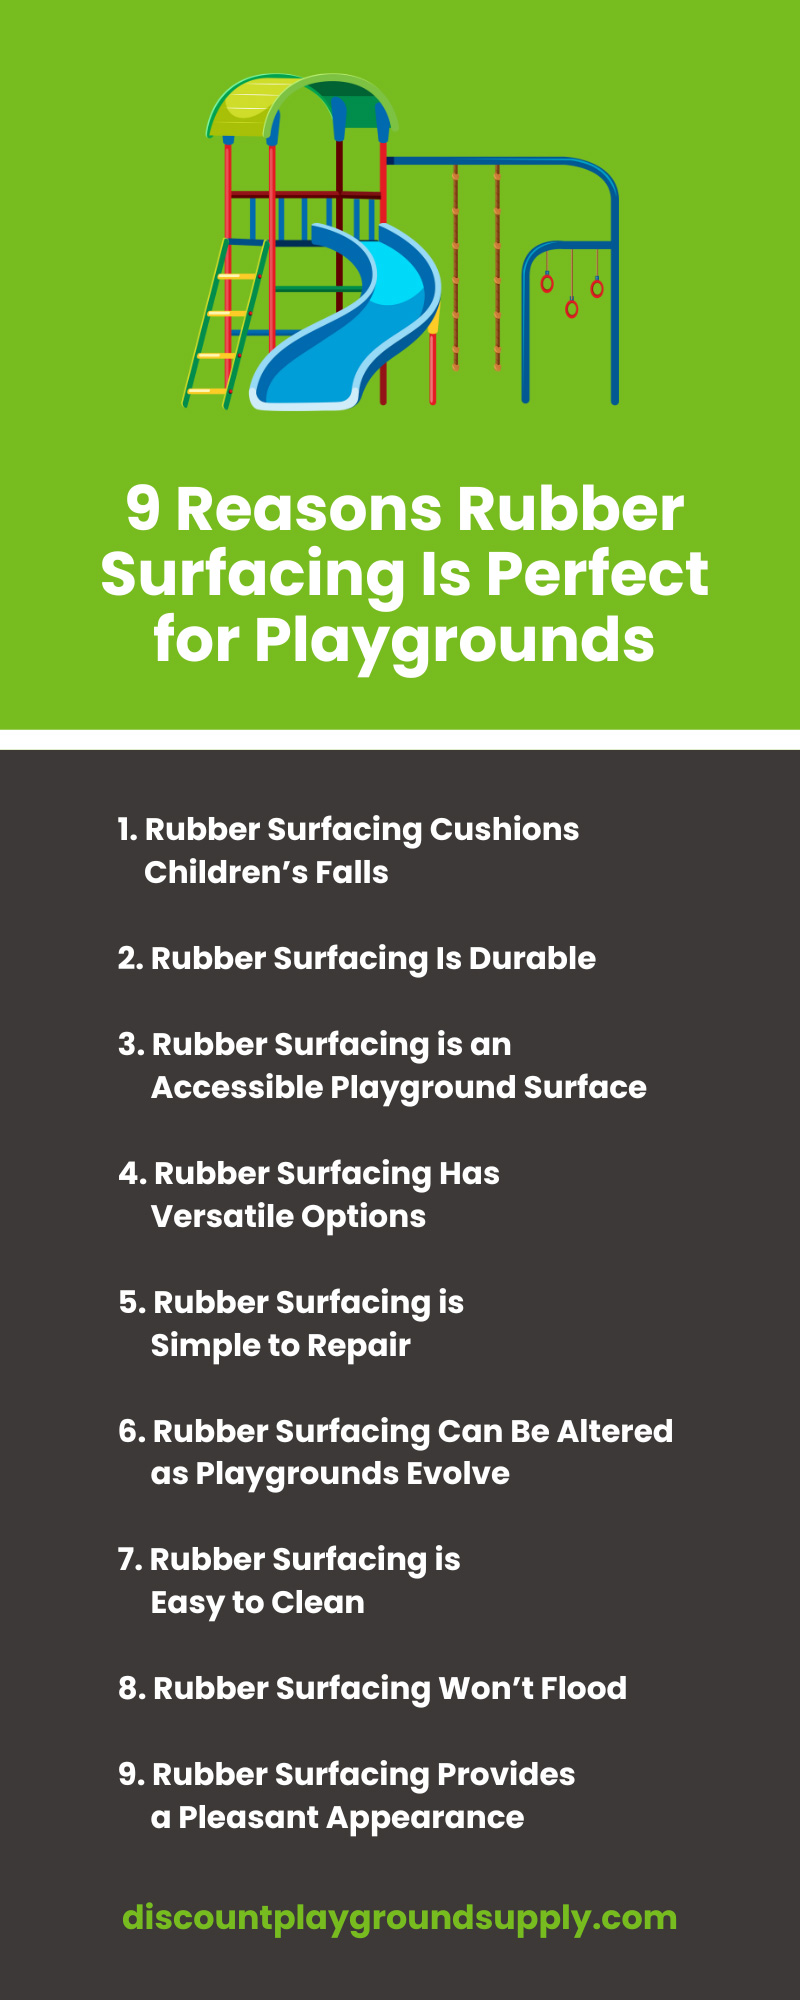 9 Reasons Rubber Surfacing Is Perfect for Playgrounds